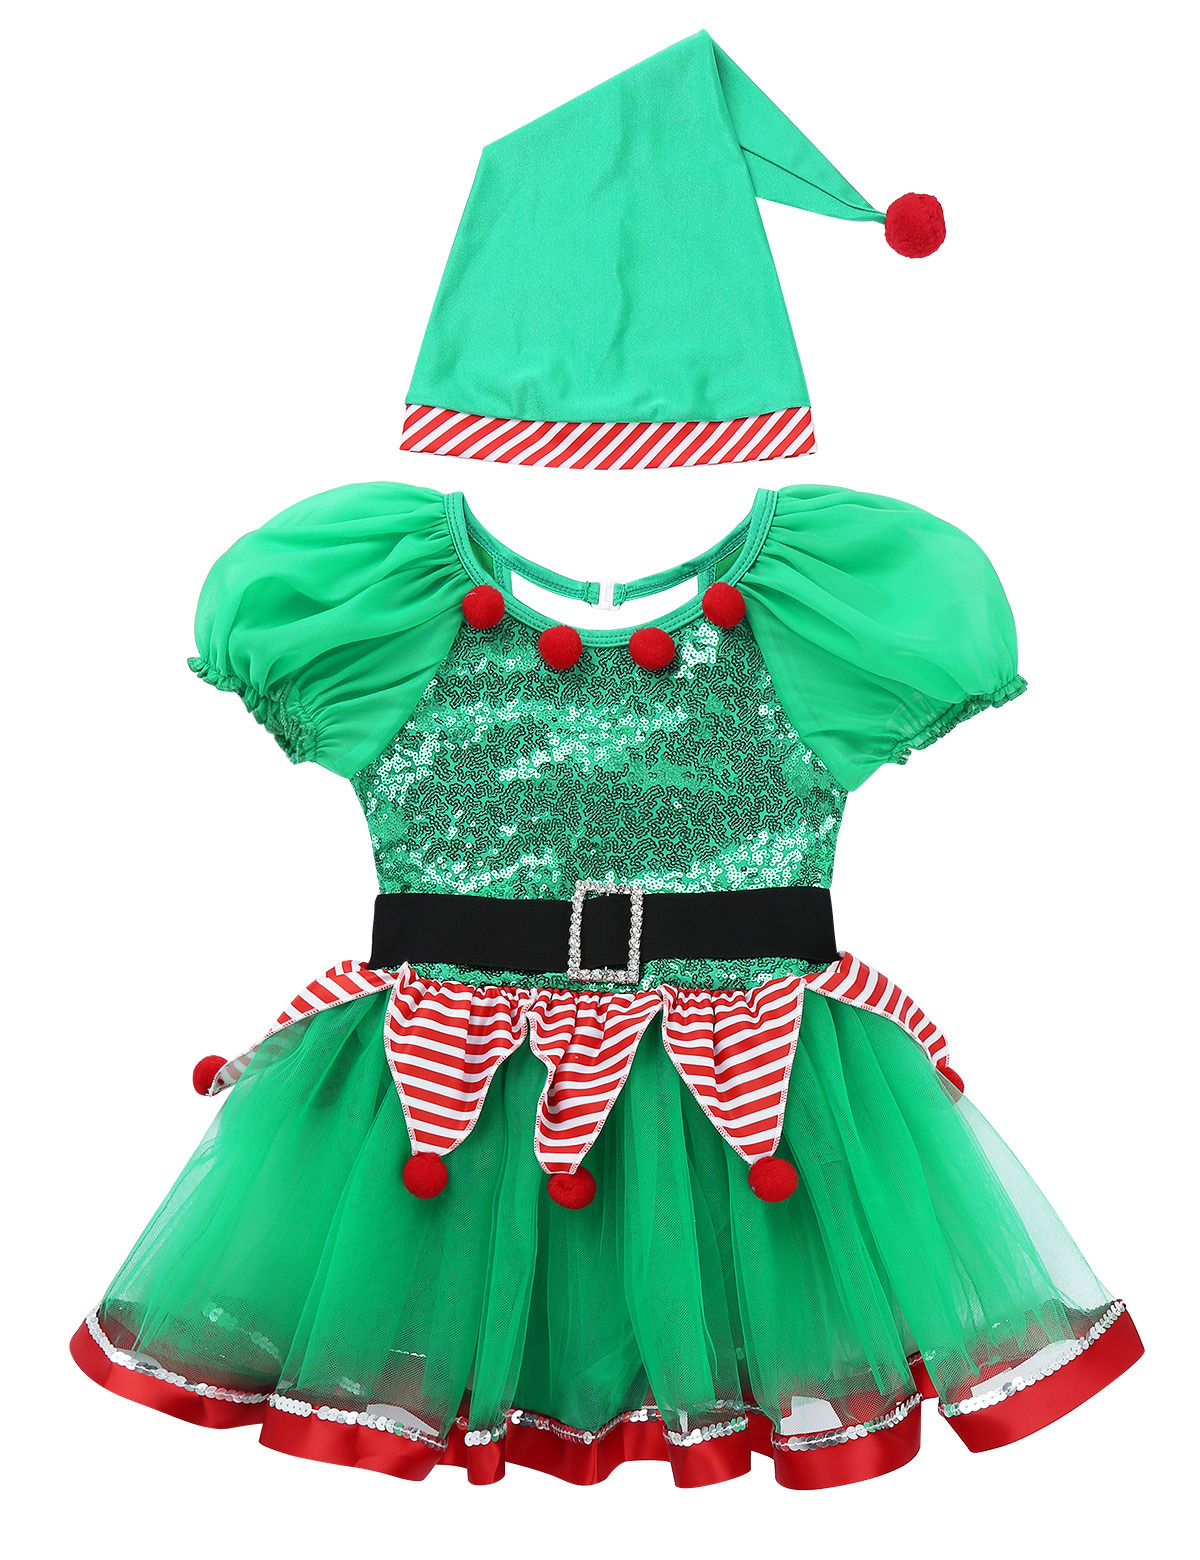 inhzoy Kids Girls Christmas Elf Cosplay Costume Xmas Outfits Sequin Tutu Dress Green 7 - image 3 of 7